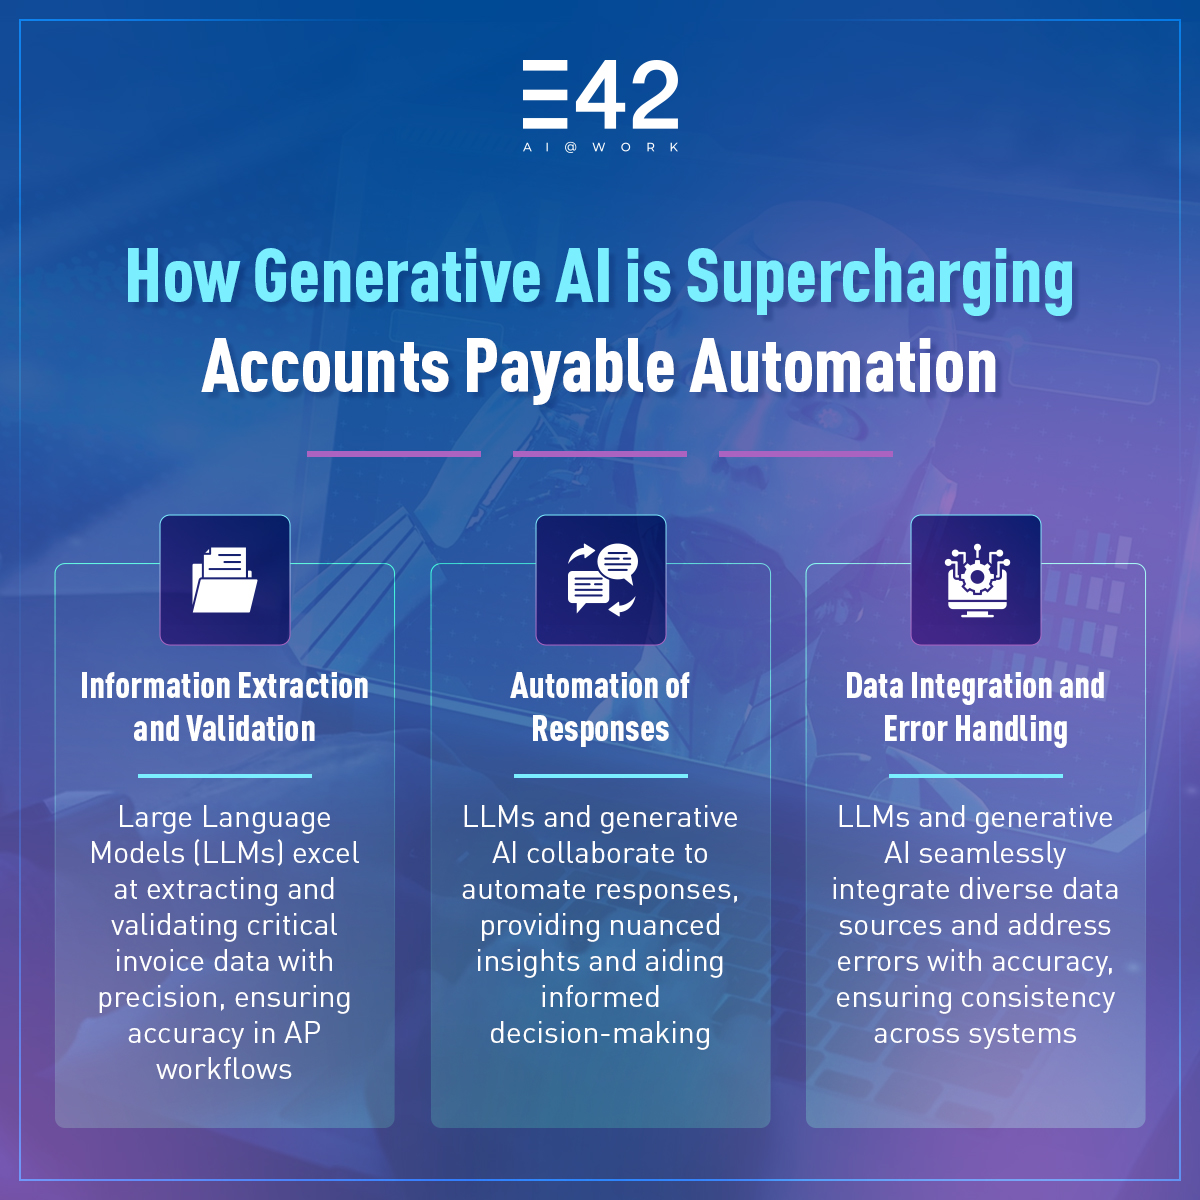 The Role of LLMs and Generative AI in Accounts Payable Automation